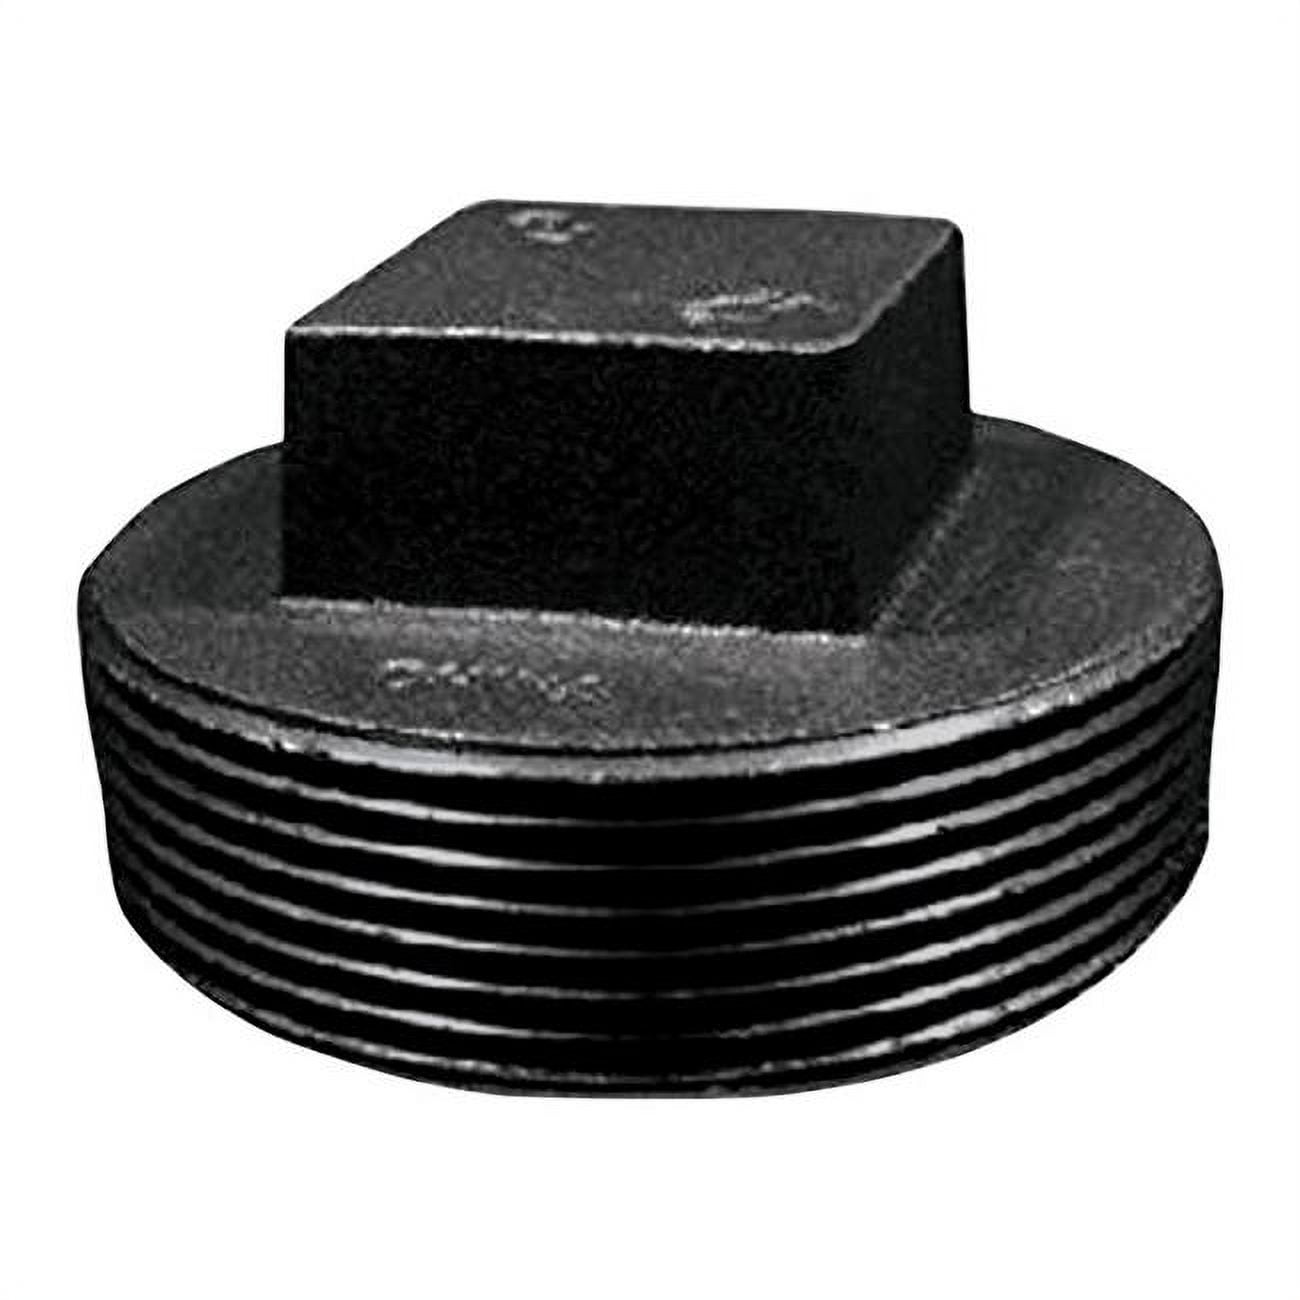 4911905 Southland 3 In. Mpt Black Malleable Iron Square Plug Head